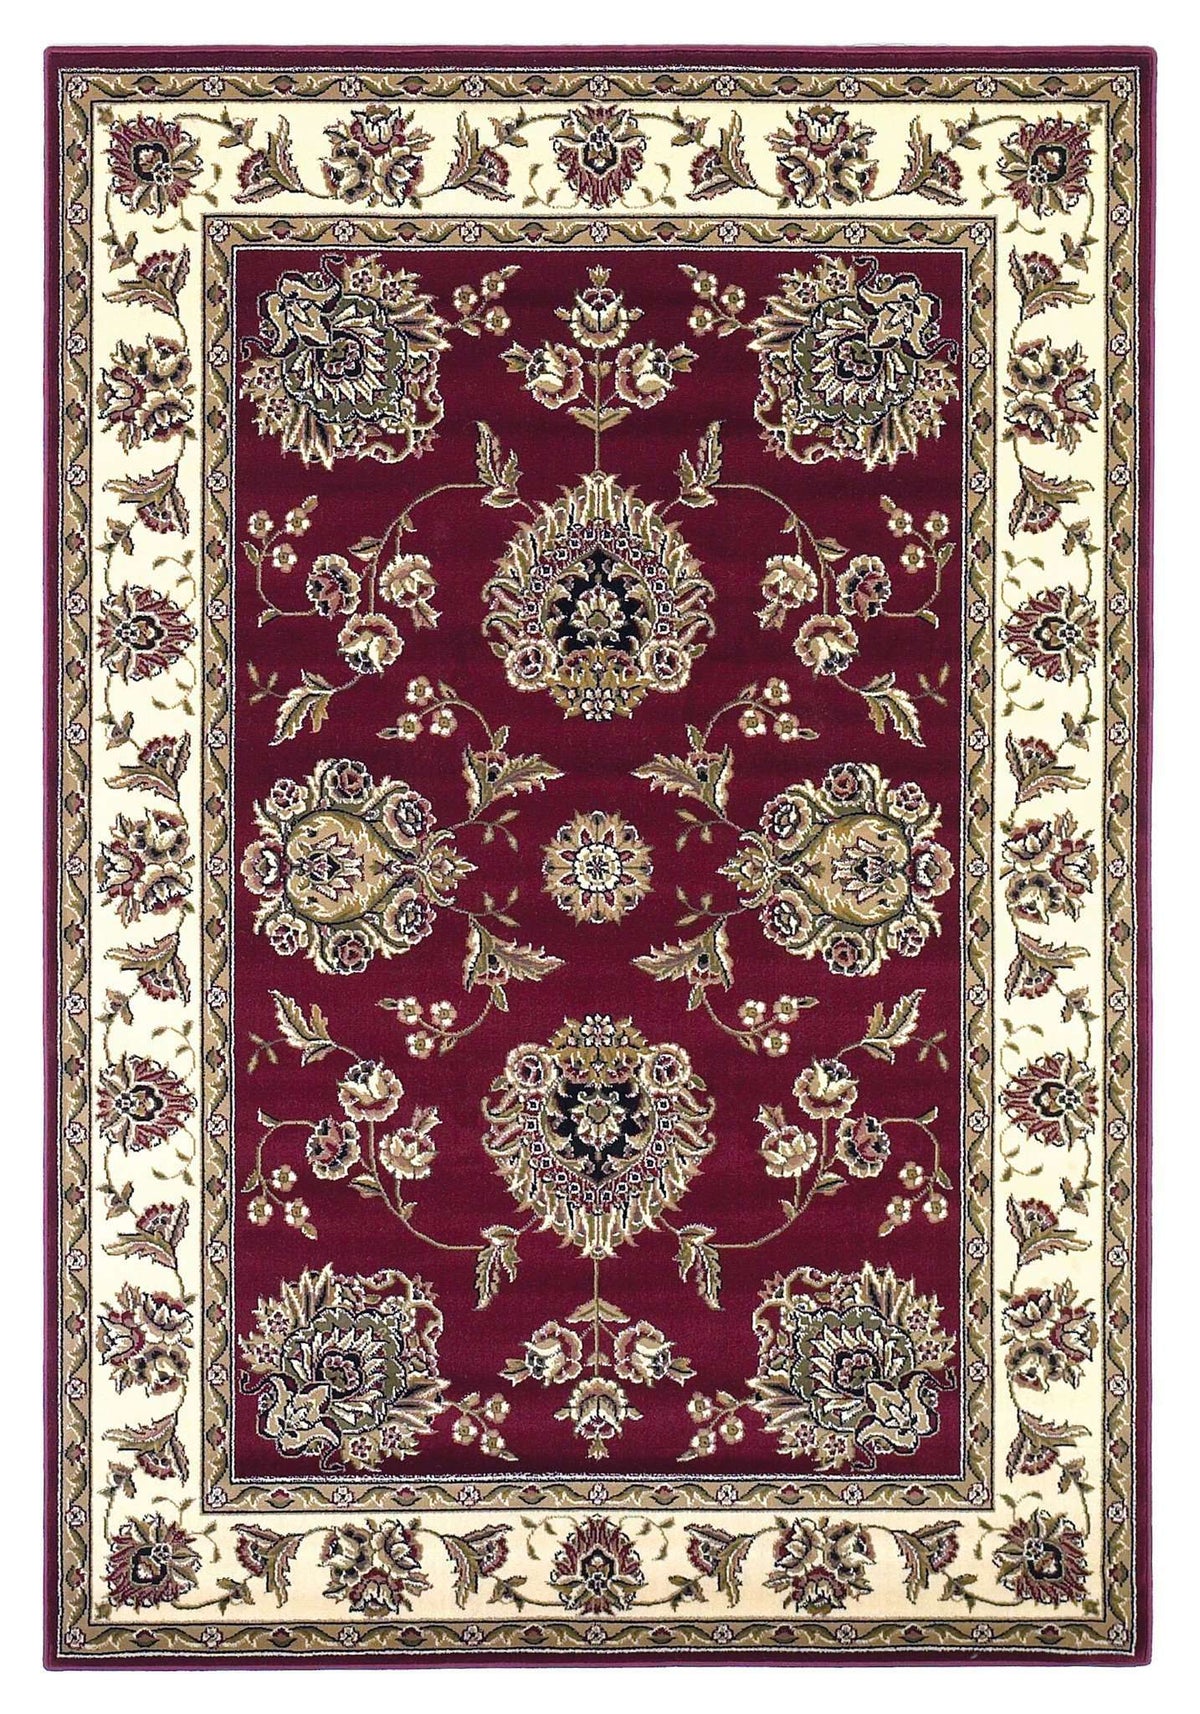 Cambridge 7340 Floral Mahal Red/Ivory Rug - Rug & Home